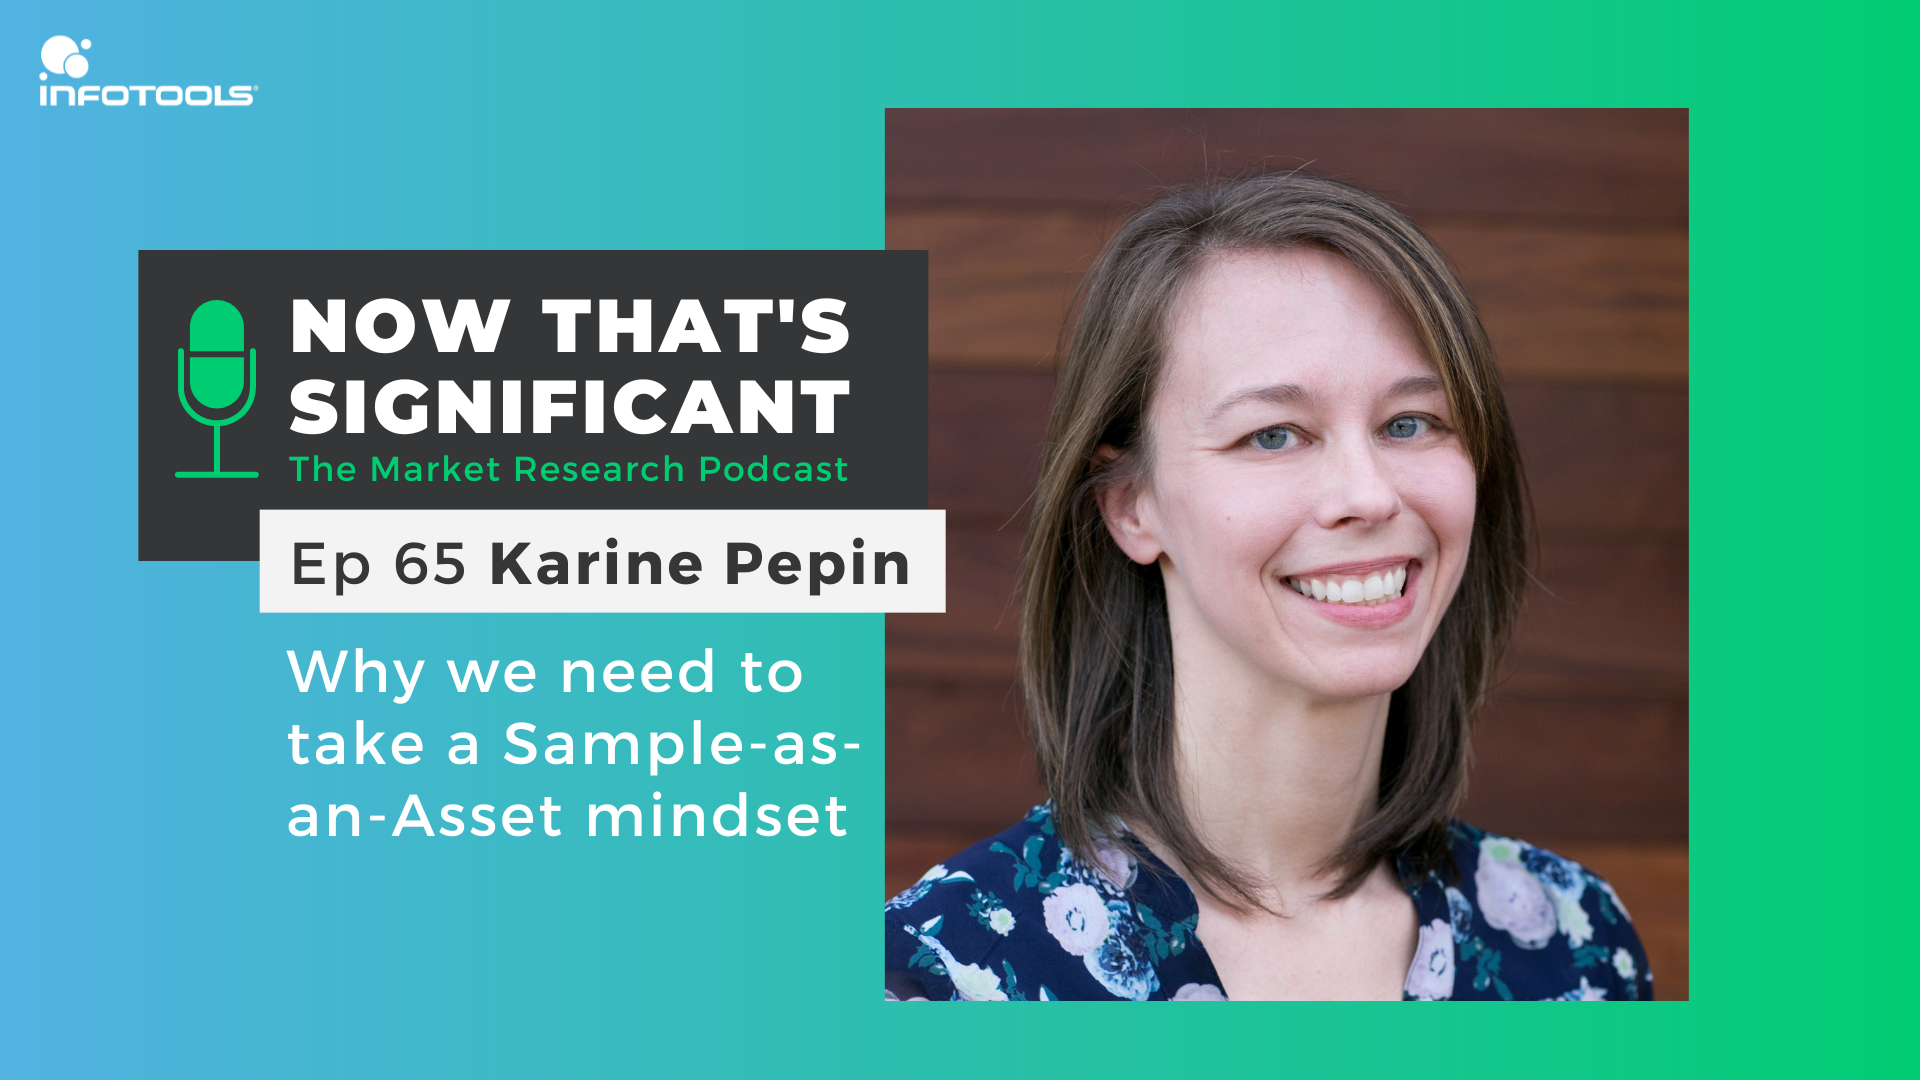 Now that’s significant podcast with Karine Pepin on viewing sample as an asset